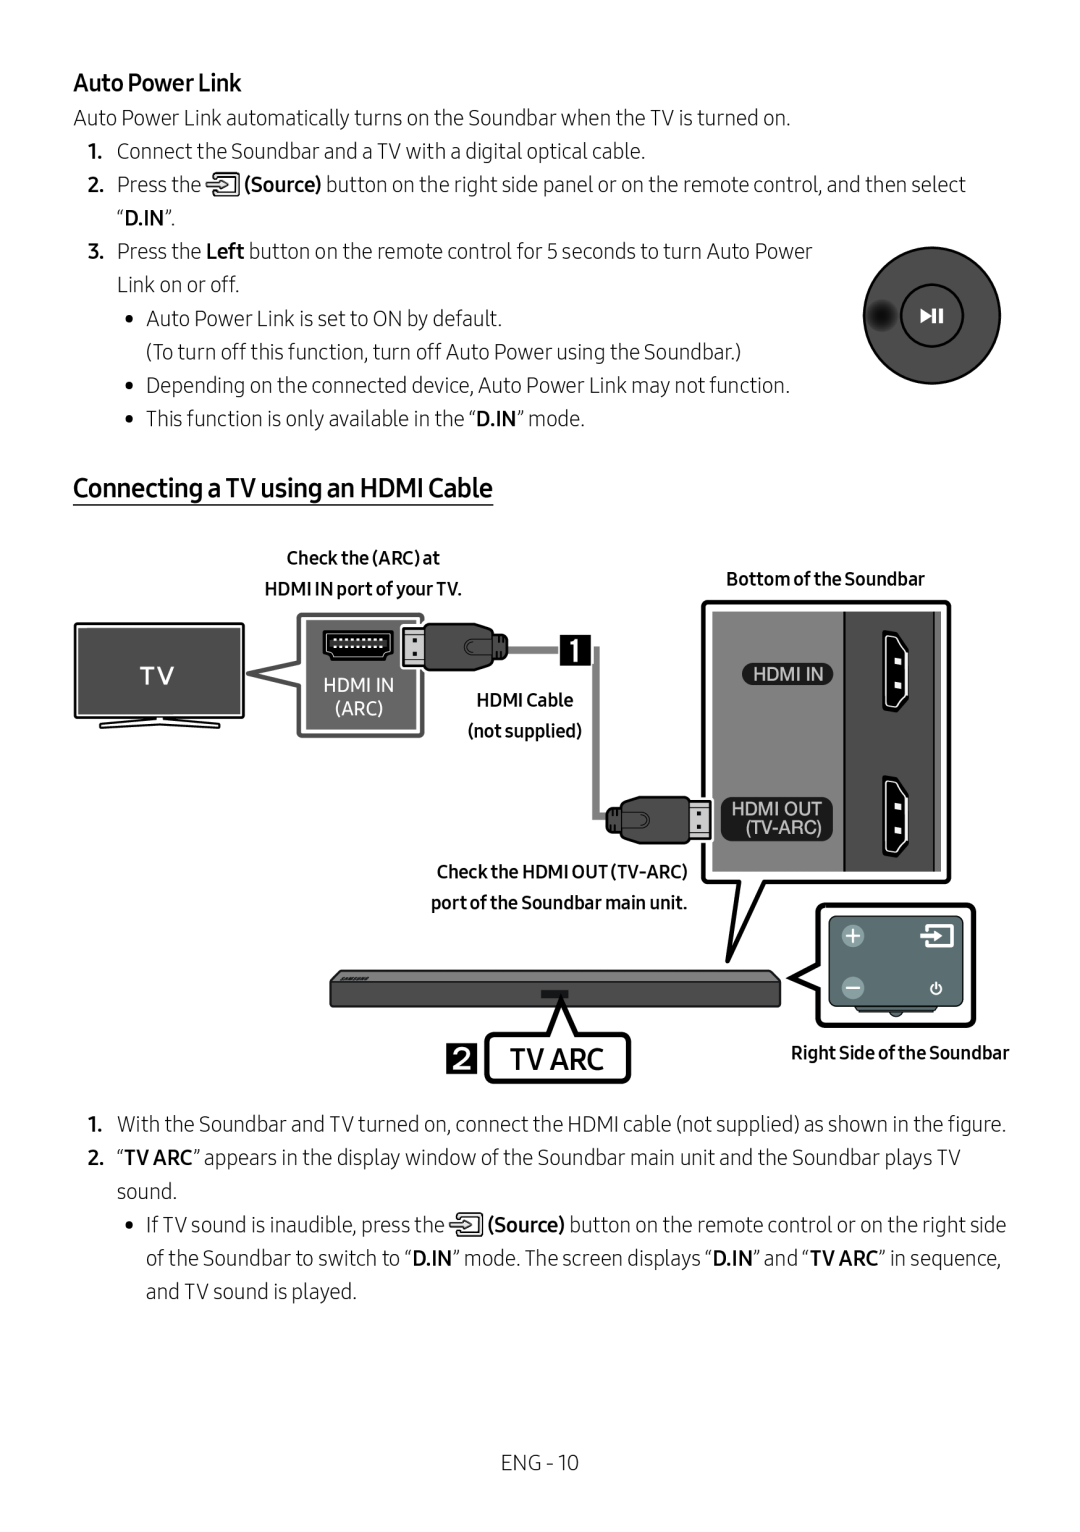 Samsung HW-M450/ZF, HW-M450/EN, HW-M450/ZG, HW-M460/XE manual  Tv Arc, Connecting a TV using an HDMI Cable, Auto Power Link 